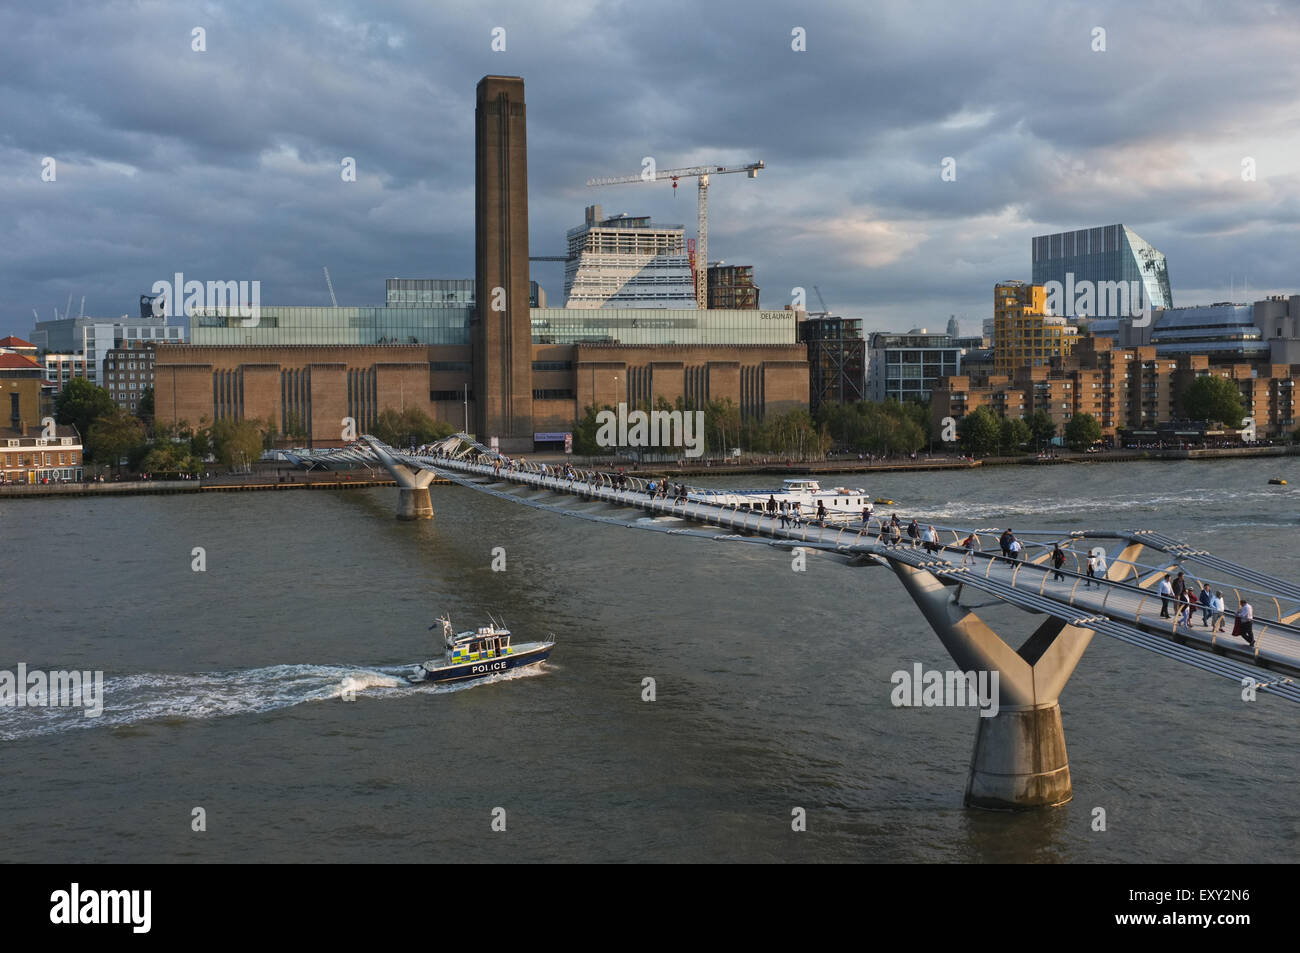 The Millennium Bridge over the Thames leading to the Tate Modern in London. A police launch is about to sail under the bridge. Stock Photo